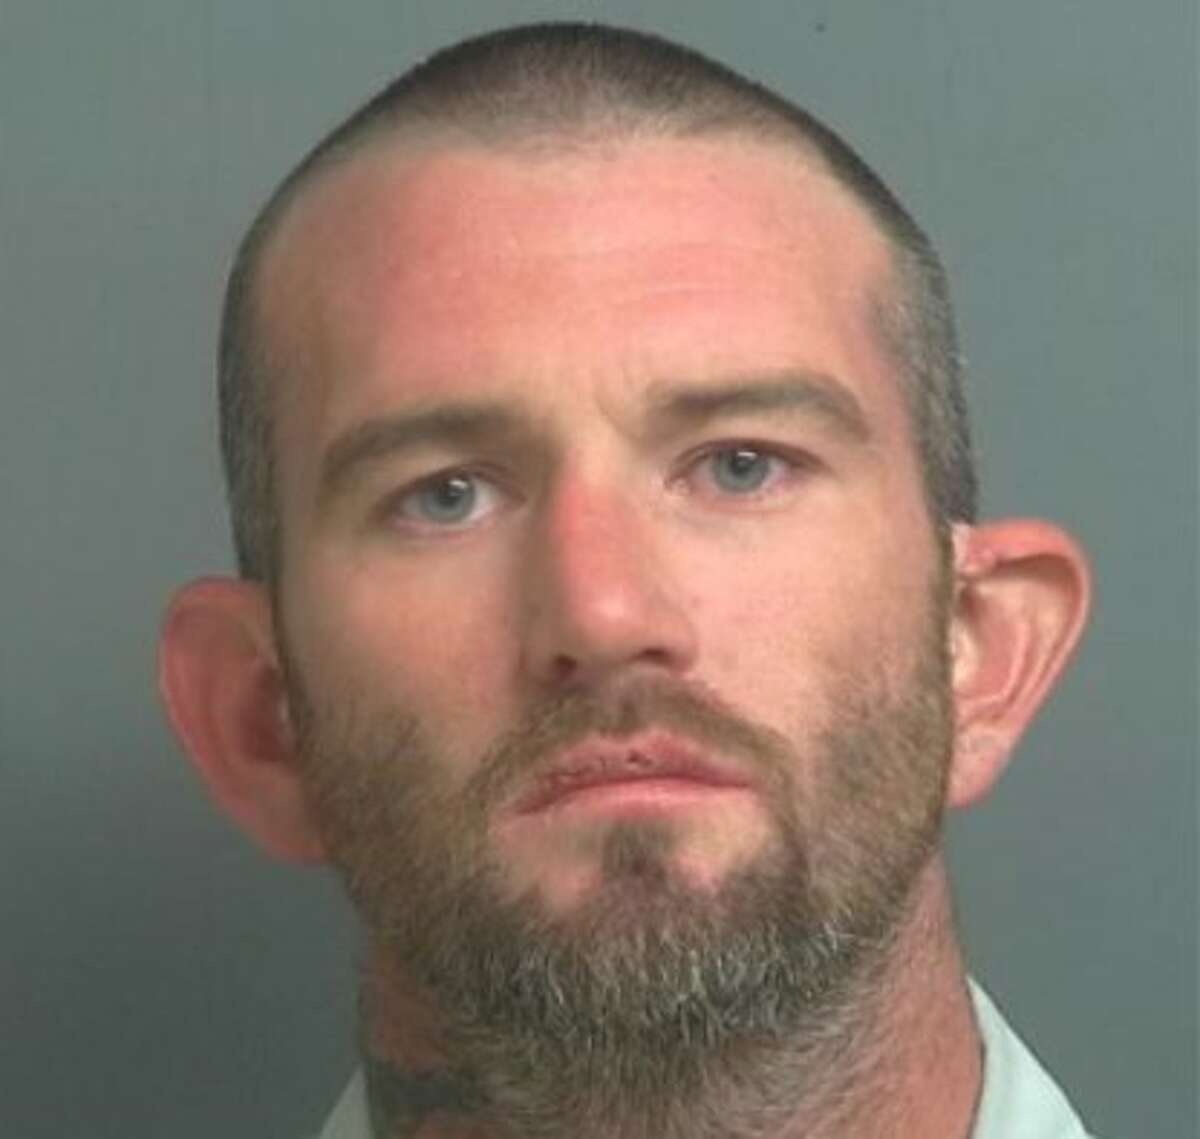 SMITH, Kenneth Berry White/Male DOB: 10-02-83 Height: 5-9 Weight: 175 lbs. Hair: Brown Eyes: Blue Warrant: #161214875 Motion to Adjudicate Assault FV Causes Bodily Injury LKA: Paradise Ln, Mongomery